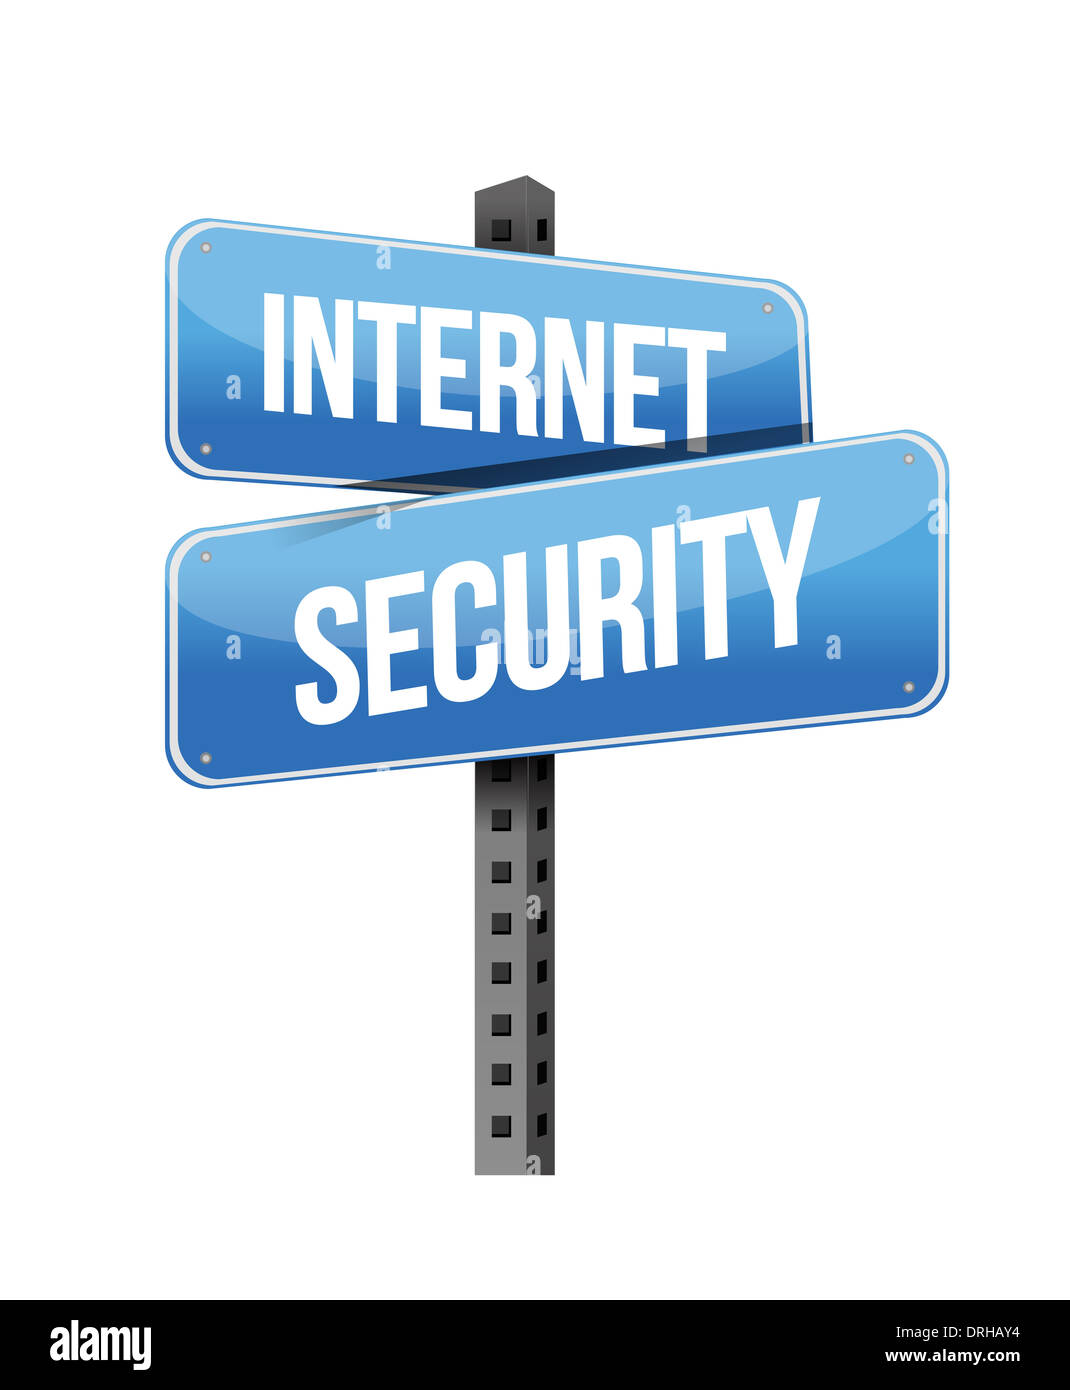 internet security illustration design over a white background Stock Photo